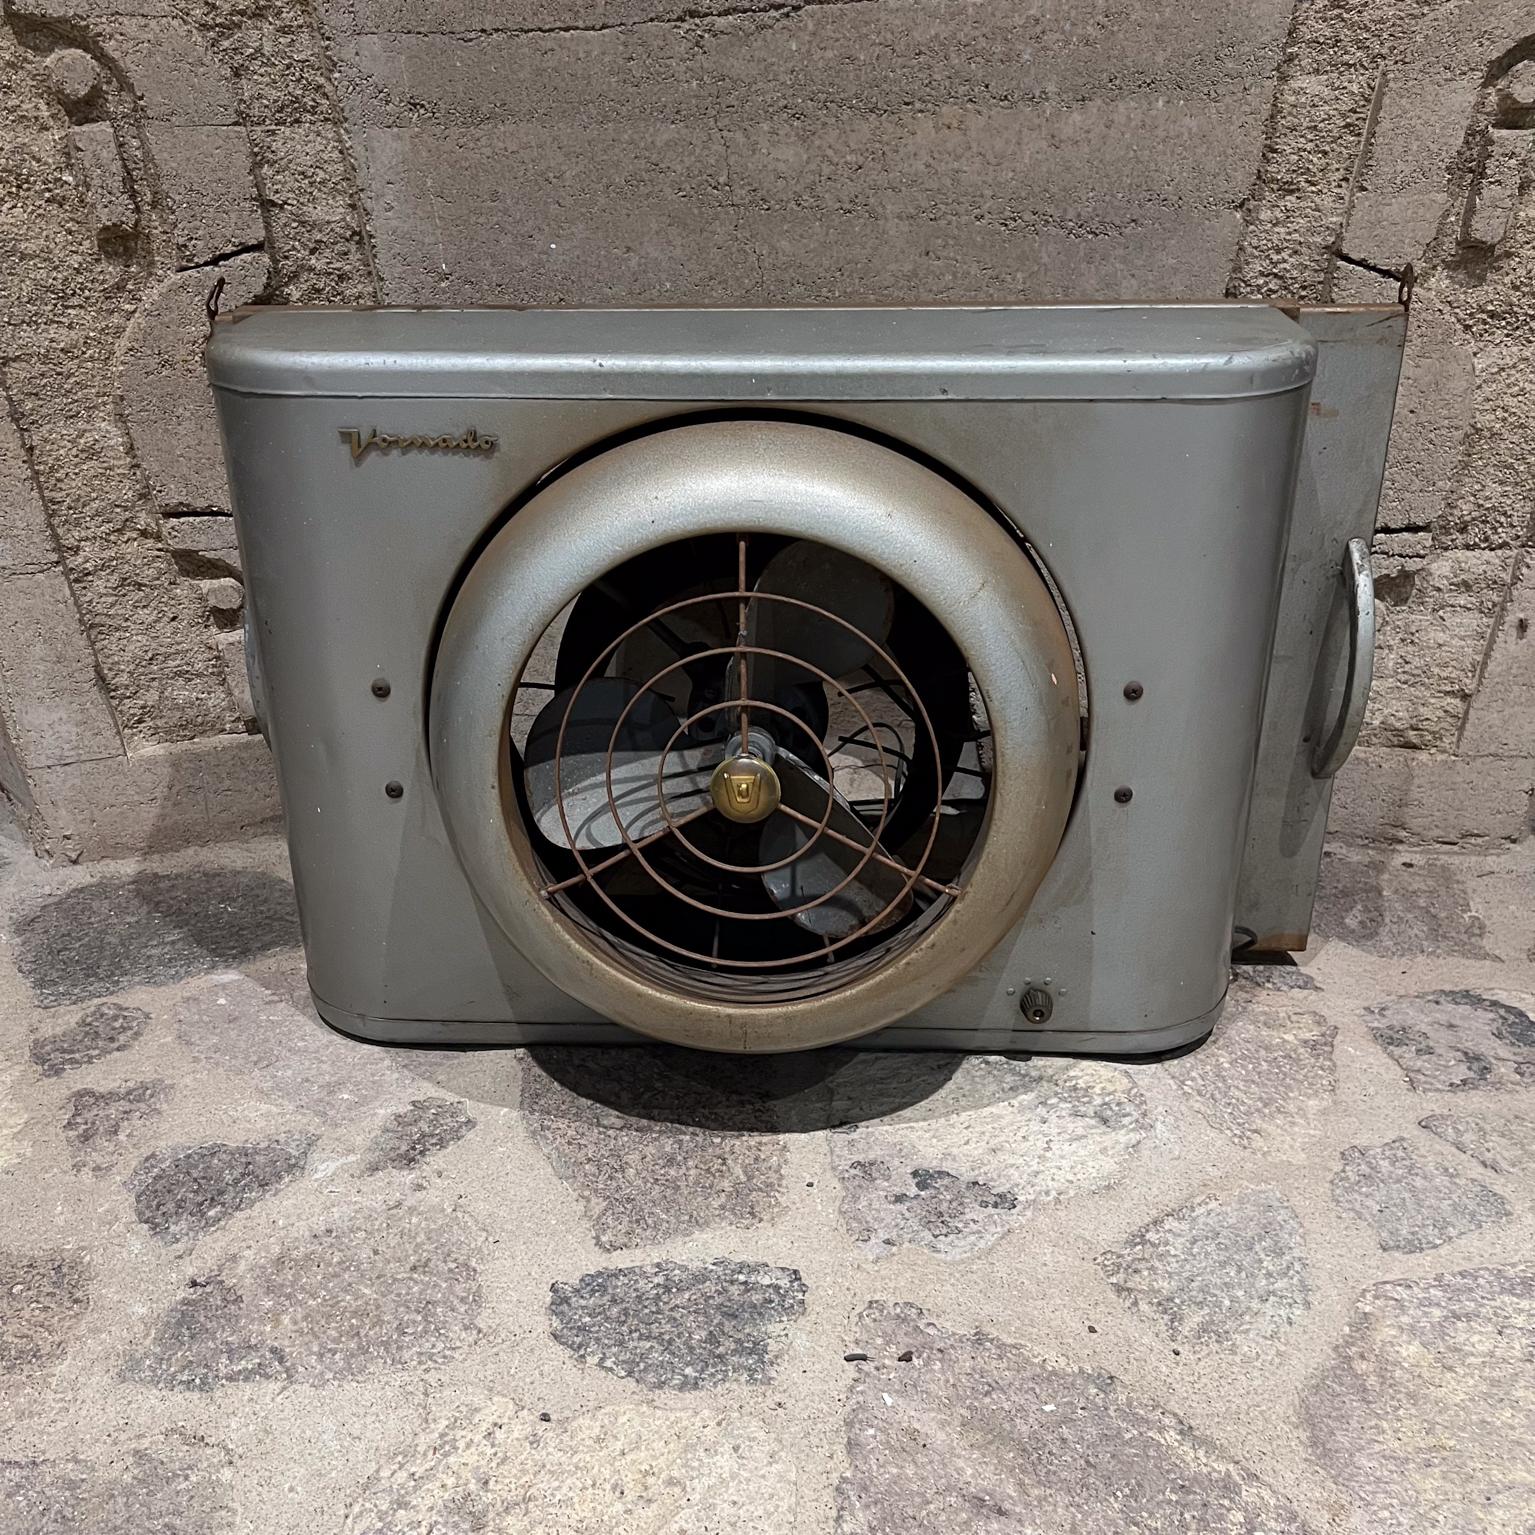 1950s Vintage Wall Unit Vornado Gray Electric Window Fan
18 h 37 w (open) 25.5 w closed x 9.5 d
Preowned unrestored vintage condition.
Tested and working.
Refer to all images please.